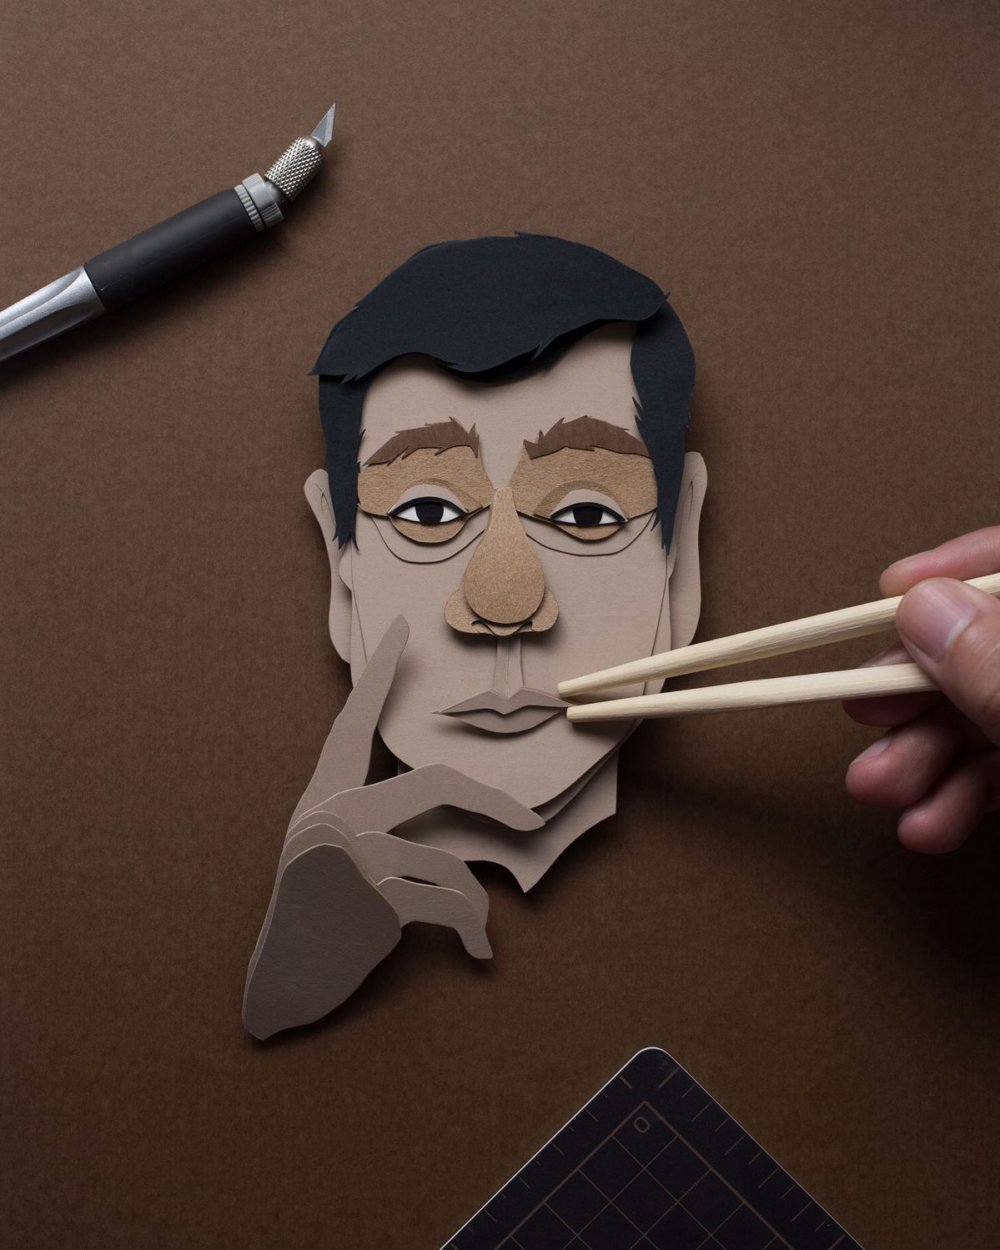 Famous People And Iconic Characters Of Pop Culture In Astonishing Paper Cuttings Of John Ed De Vera 1